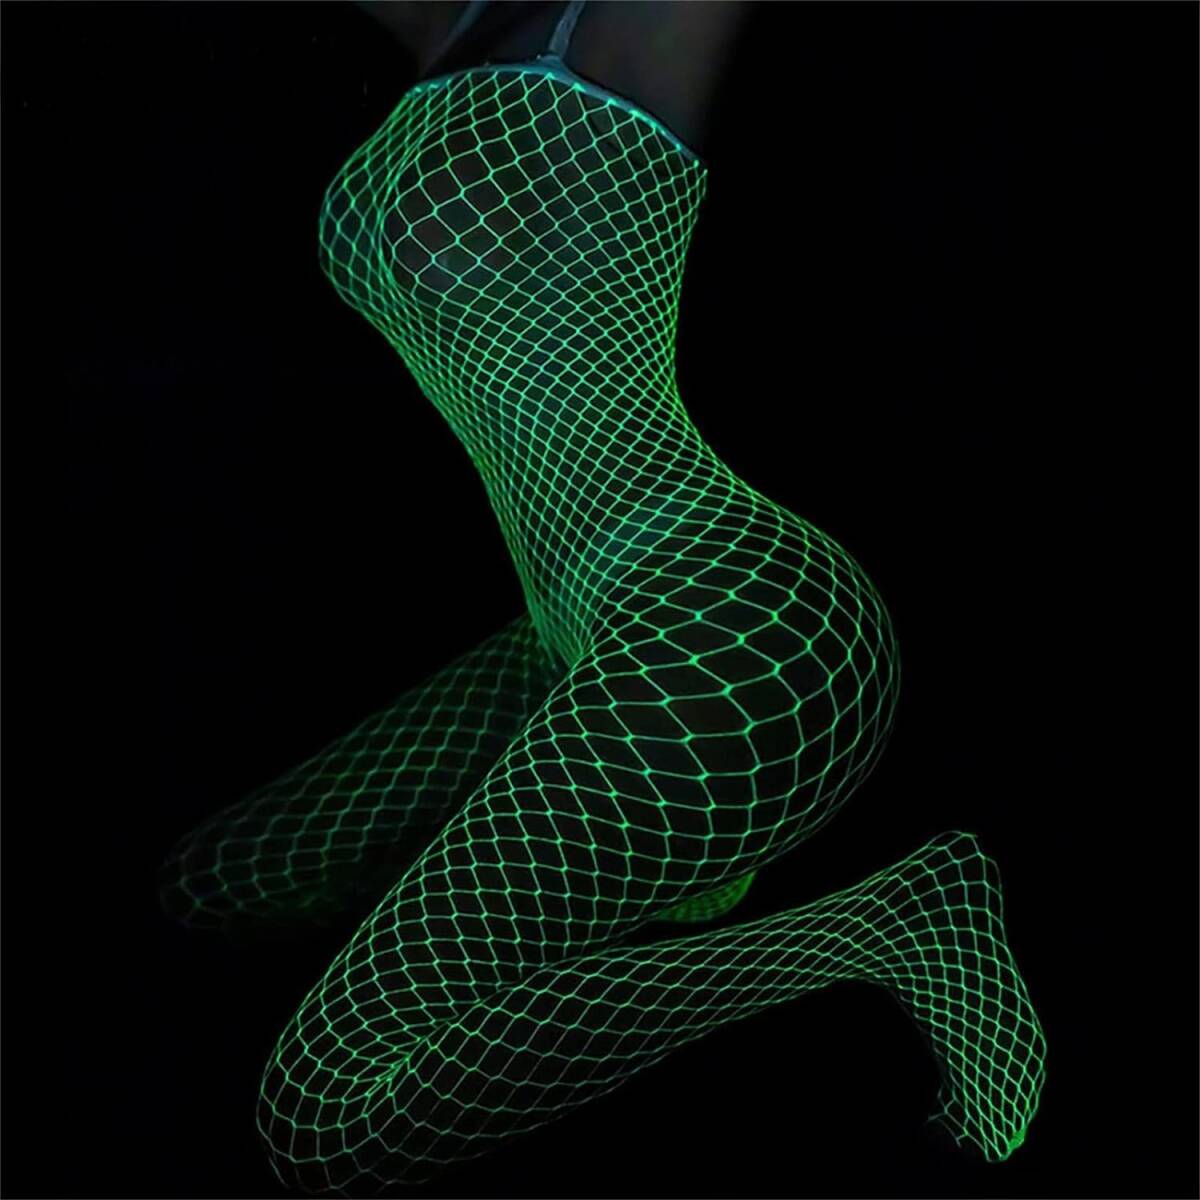  this season new work night light UV fluorescence green fish net shoulder shoulder attaching type body stockings hole costume play clothes Night wear 